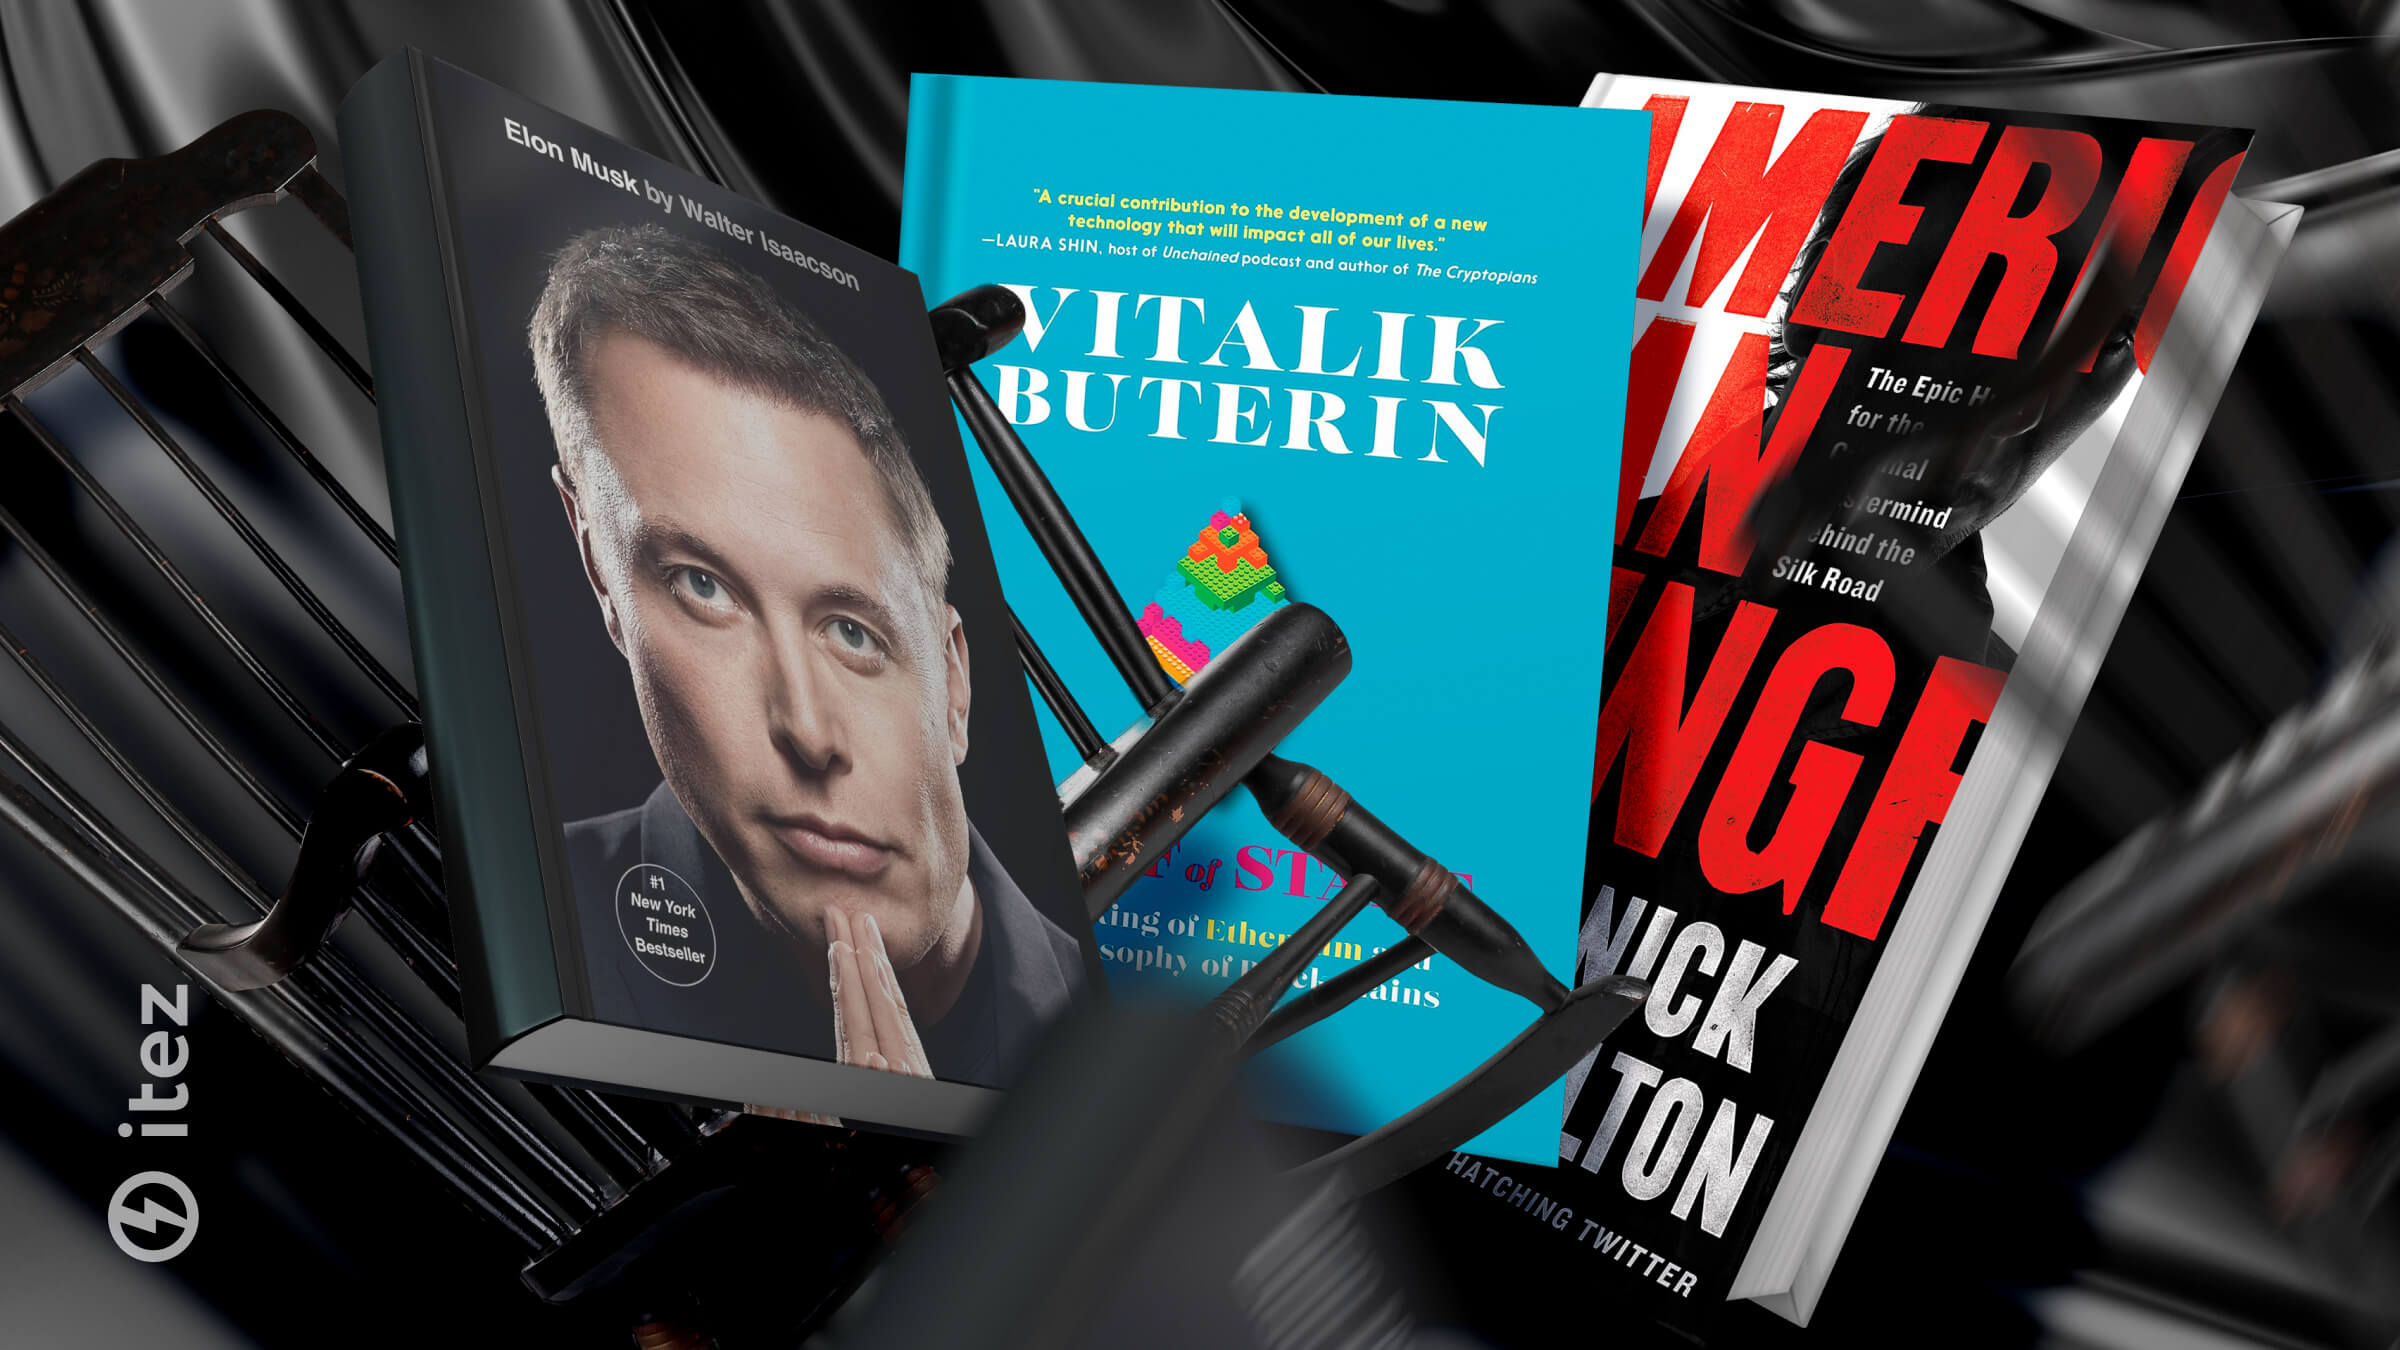 Musk, Buterin, and Ulbricht: 3 books about crypto enterprisers